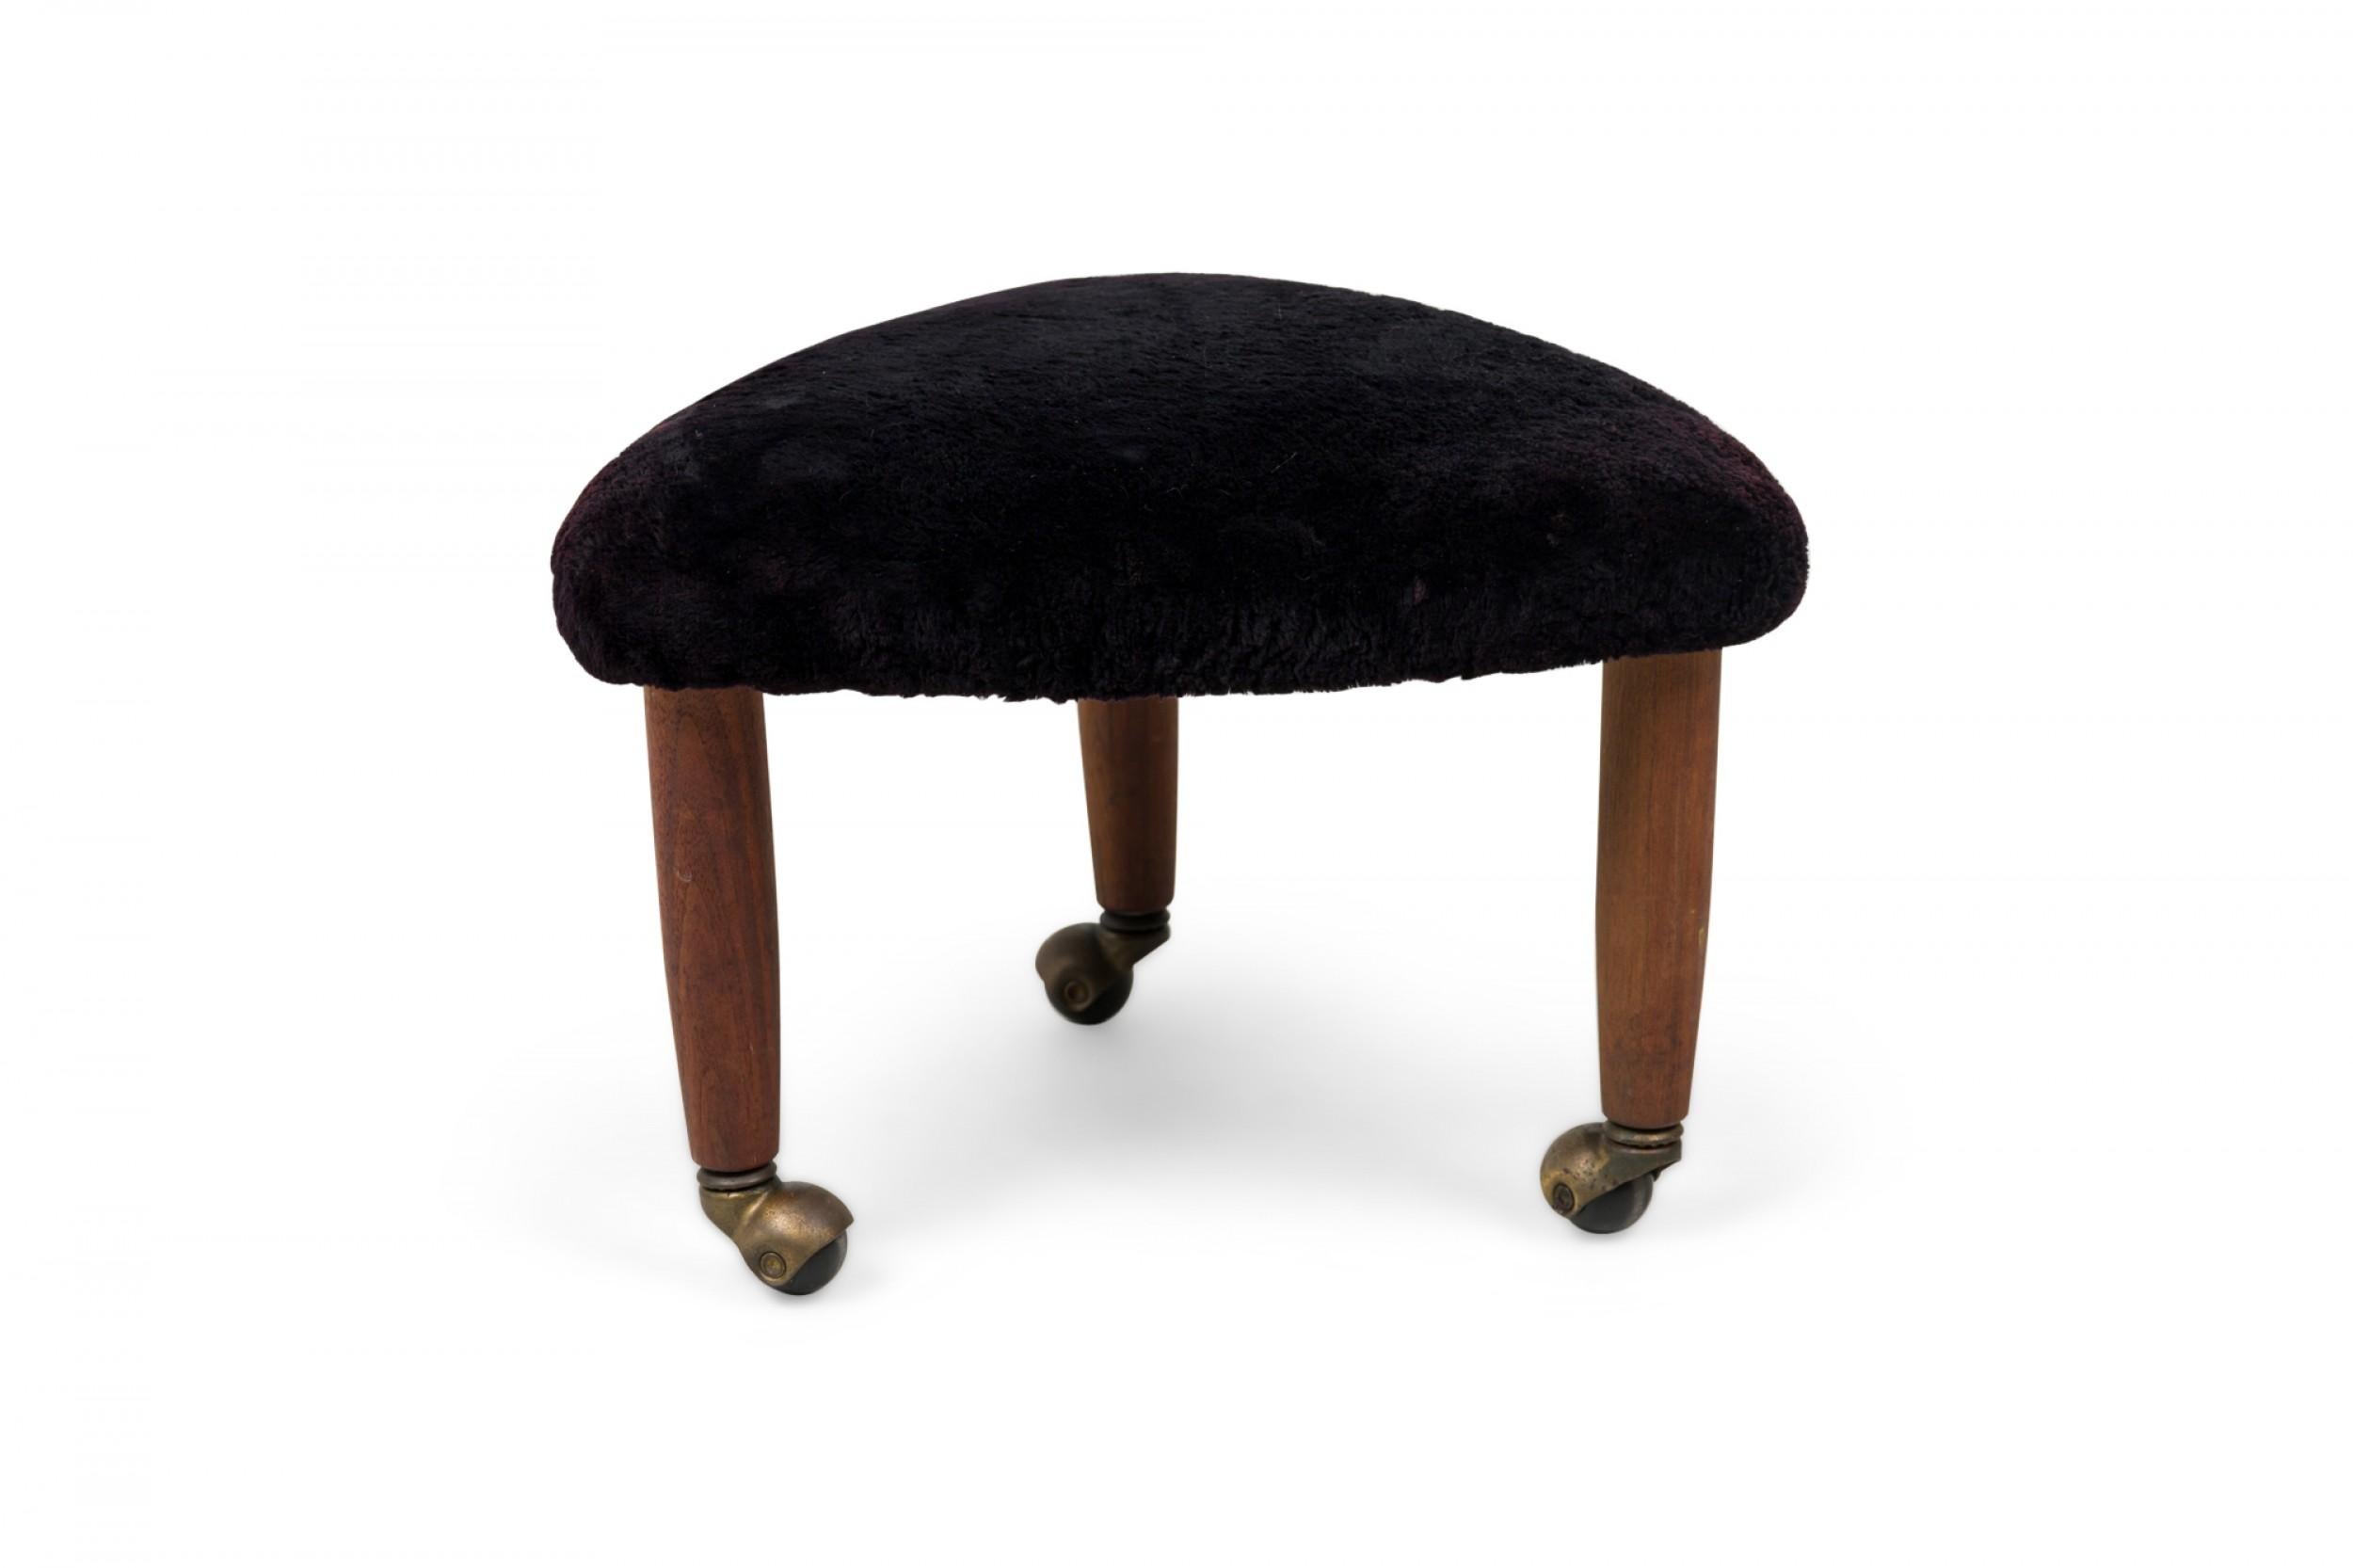 Mid-Century Italian Modern triangular footstool, upholstered in plush black velour, standing on 3 legs with brass casters. (manner of GIO PONTI)(Available in orange: REG4086 as a PAIR)